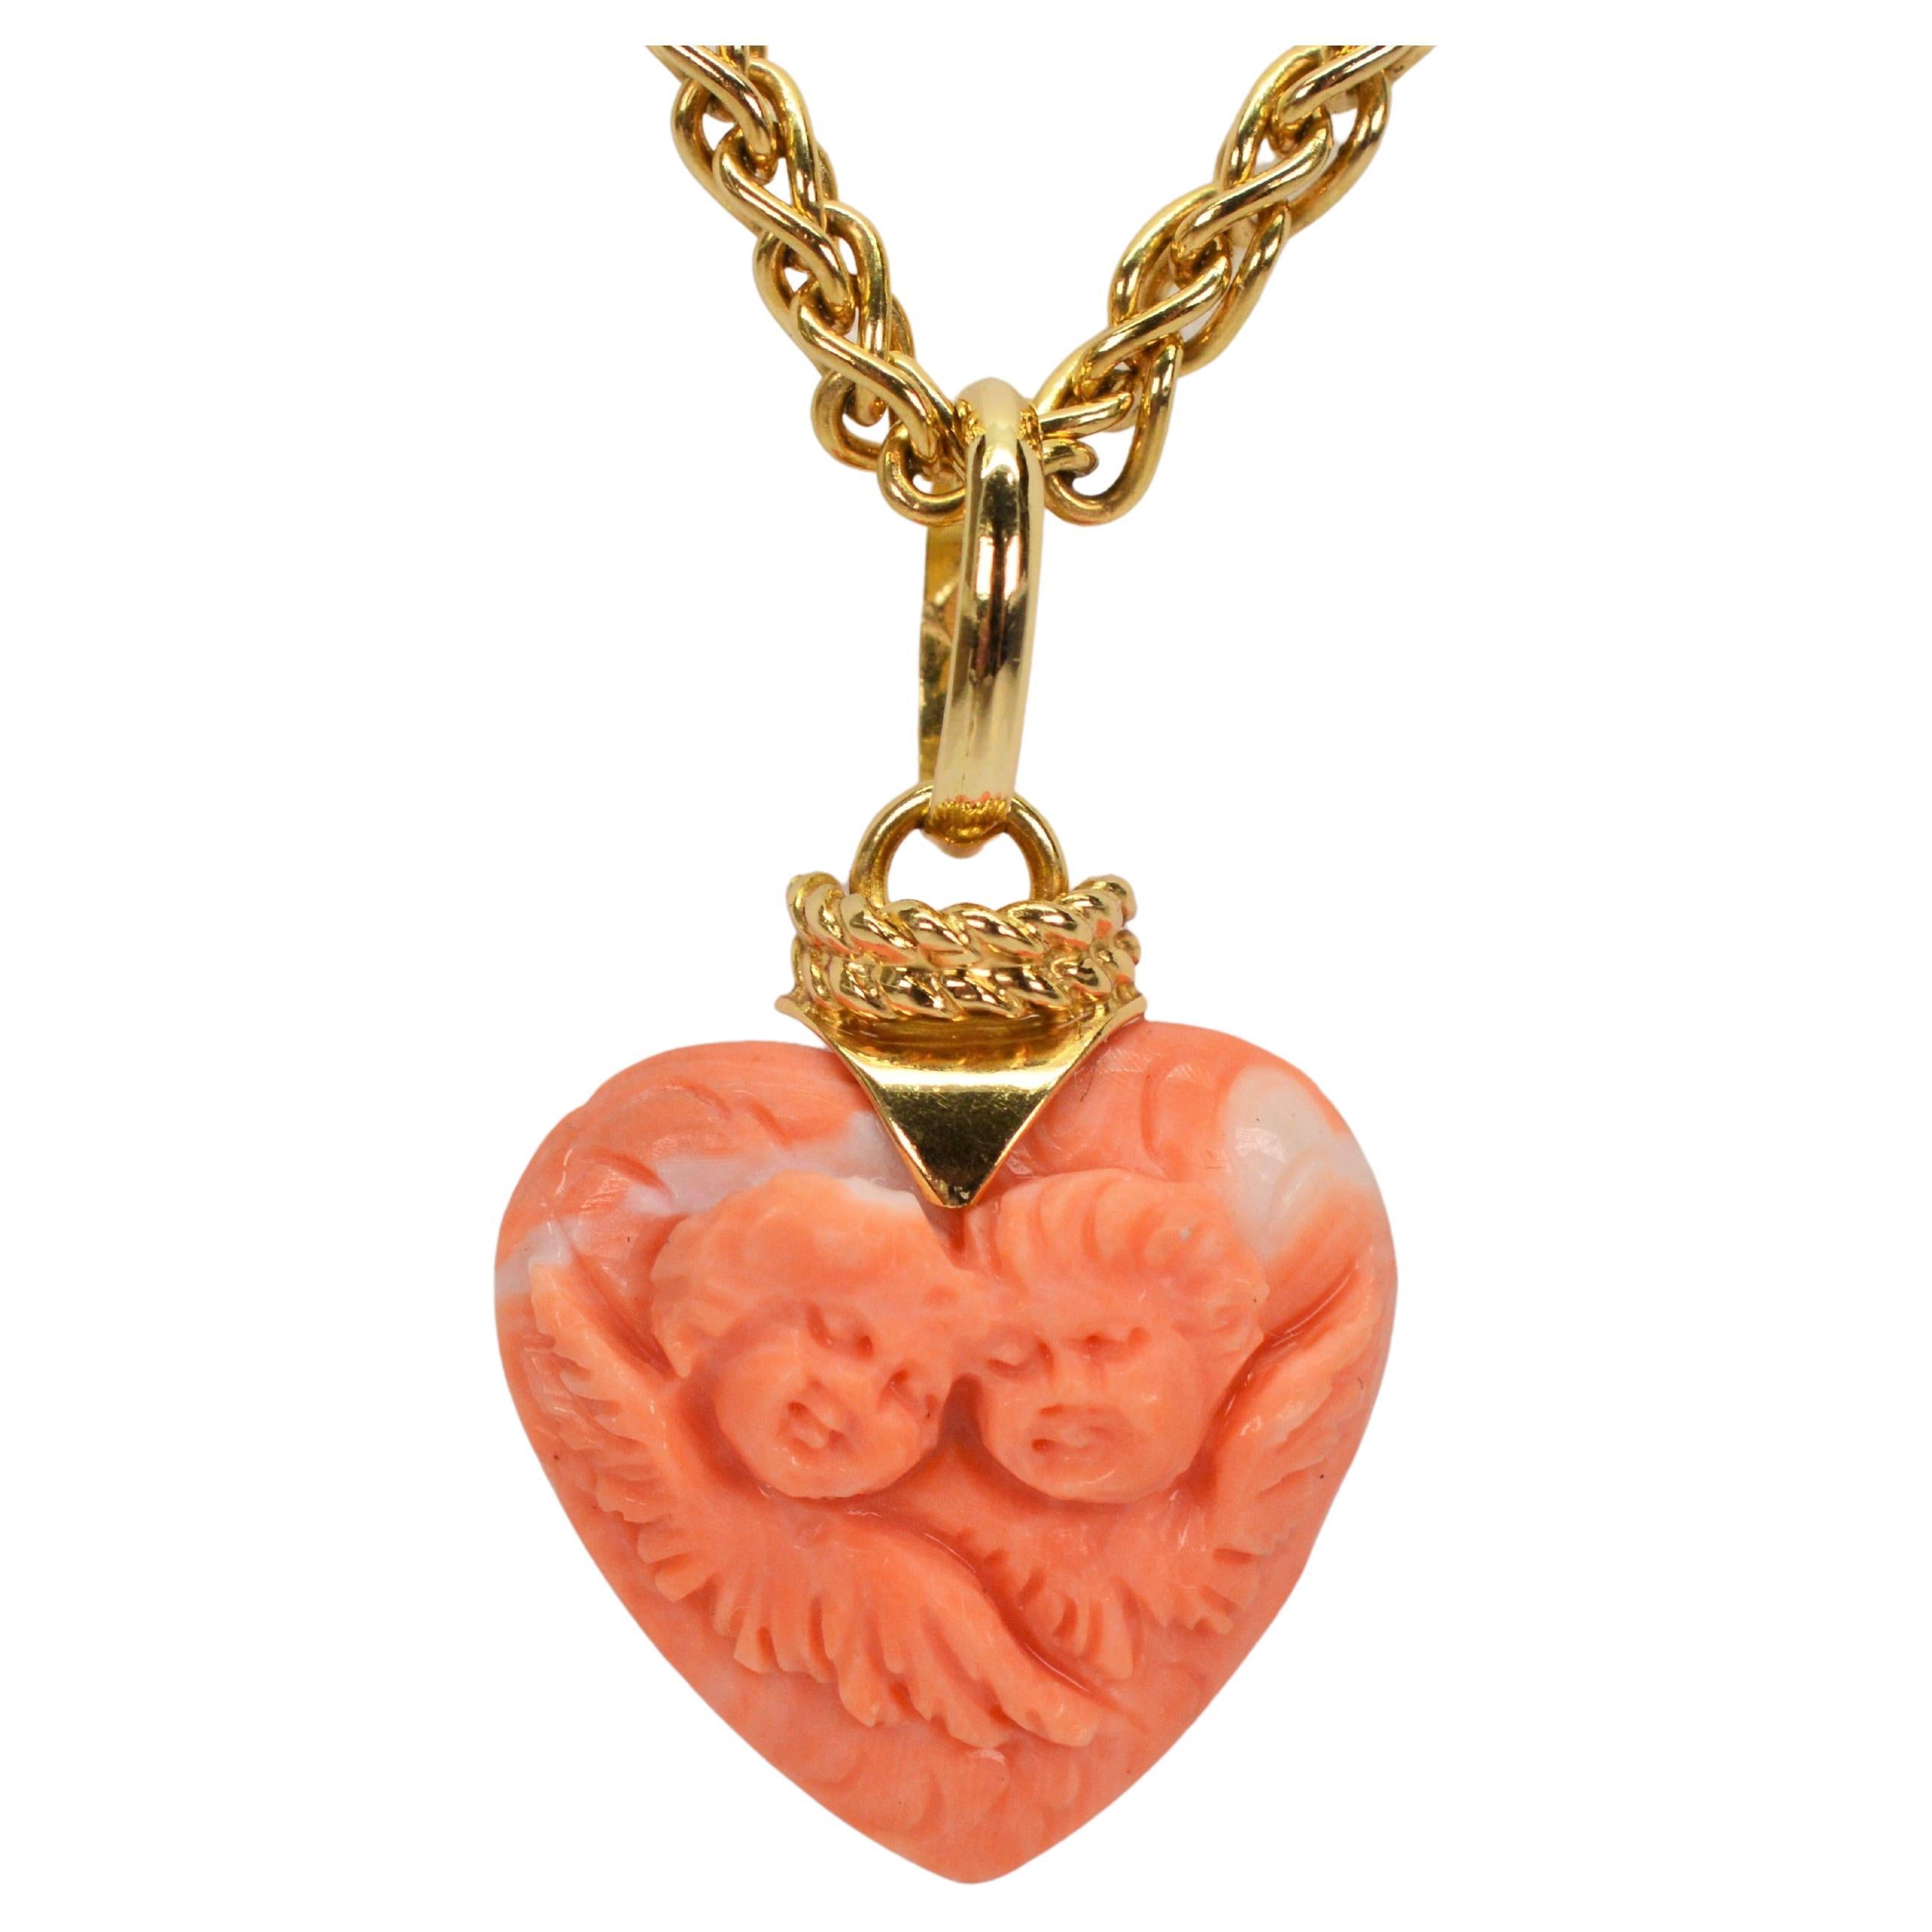 Hand Carved Cherub Coral Heart Pendant 18 Karat Italian Gold Chain Necklace For Sale